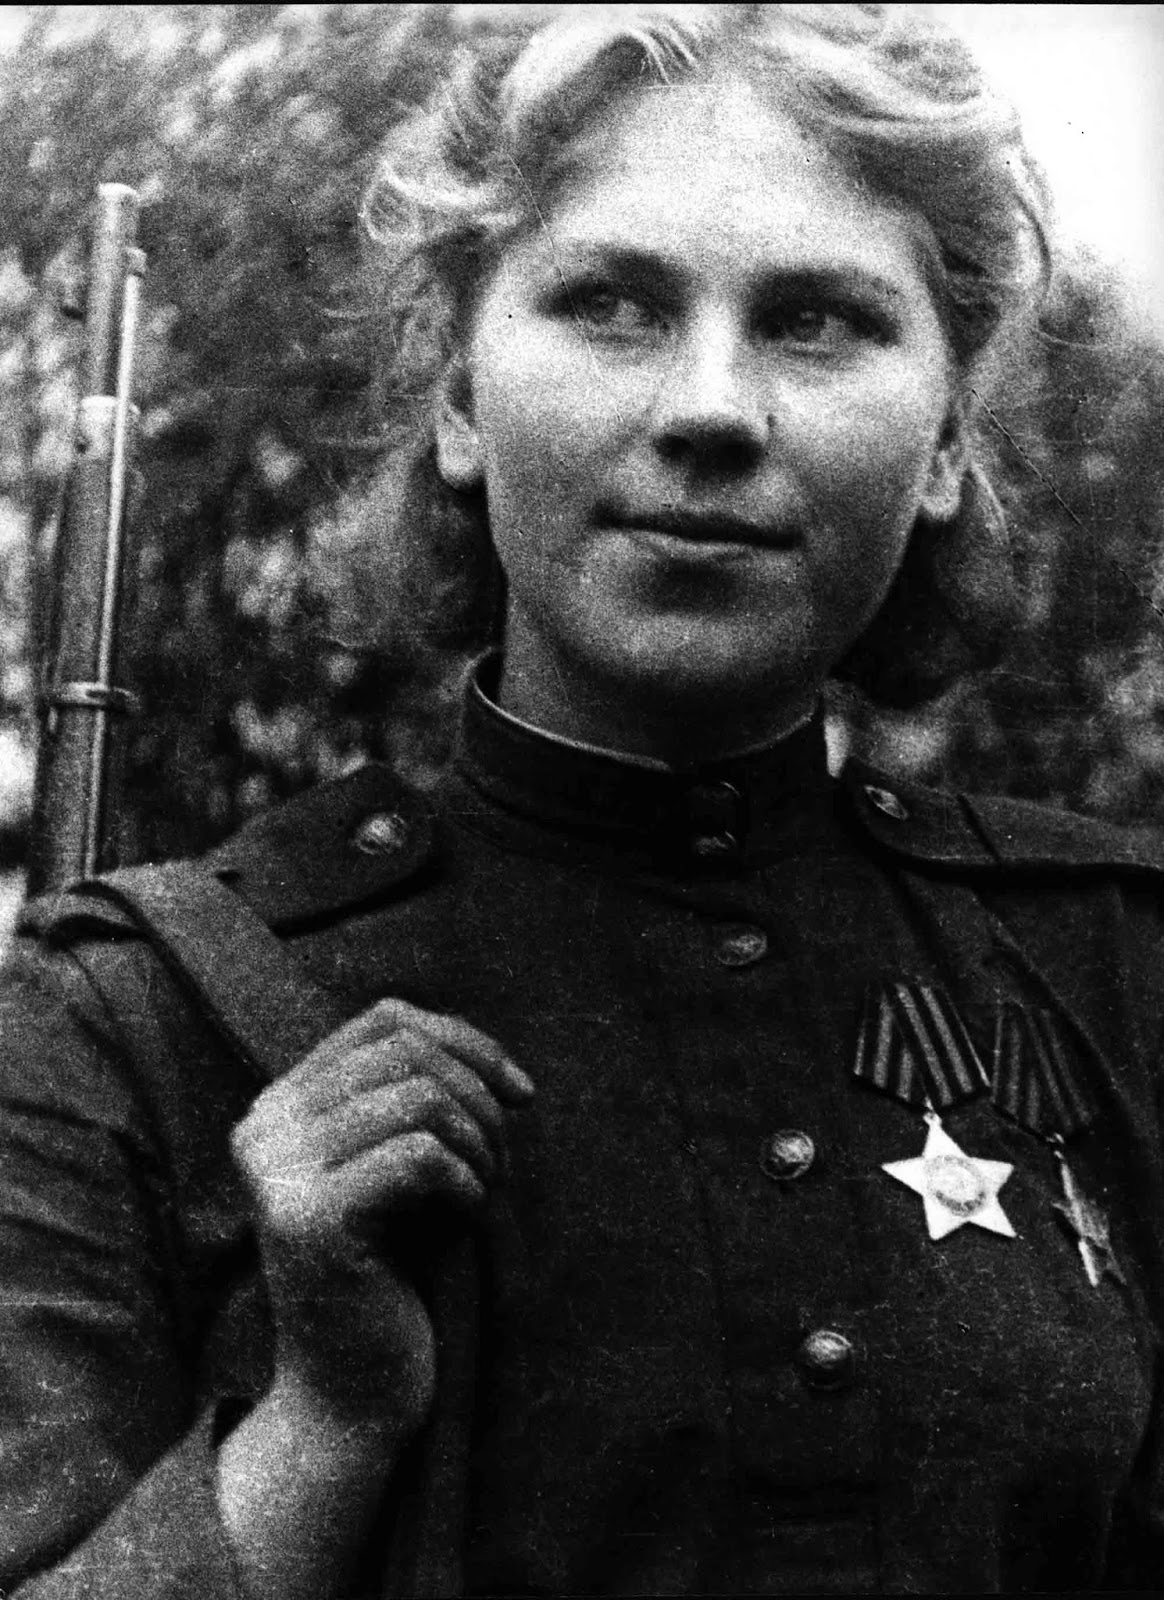 This portrait of Roza Shanina that shows her in her uniforms and with her awards, was taken in January 1944